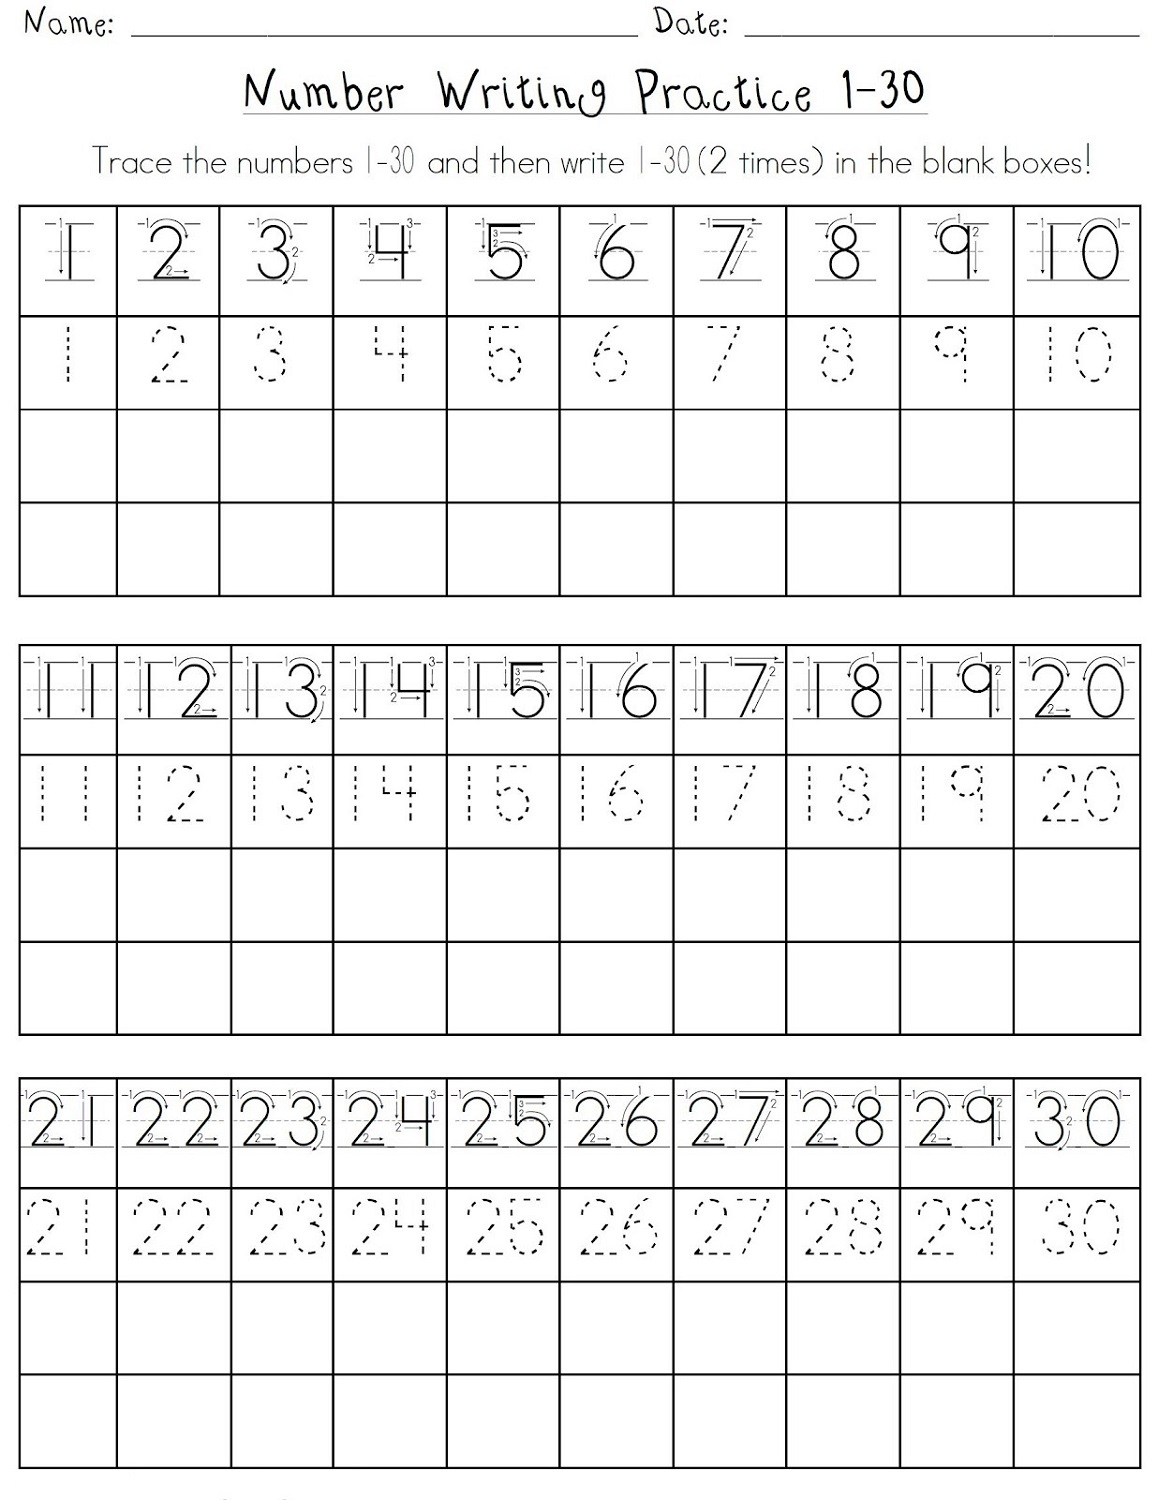 traceable numbers worksheets writing